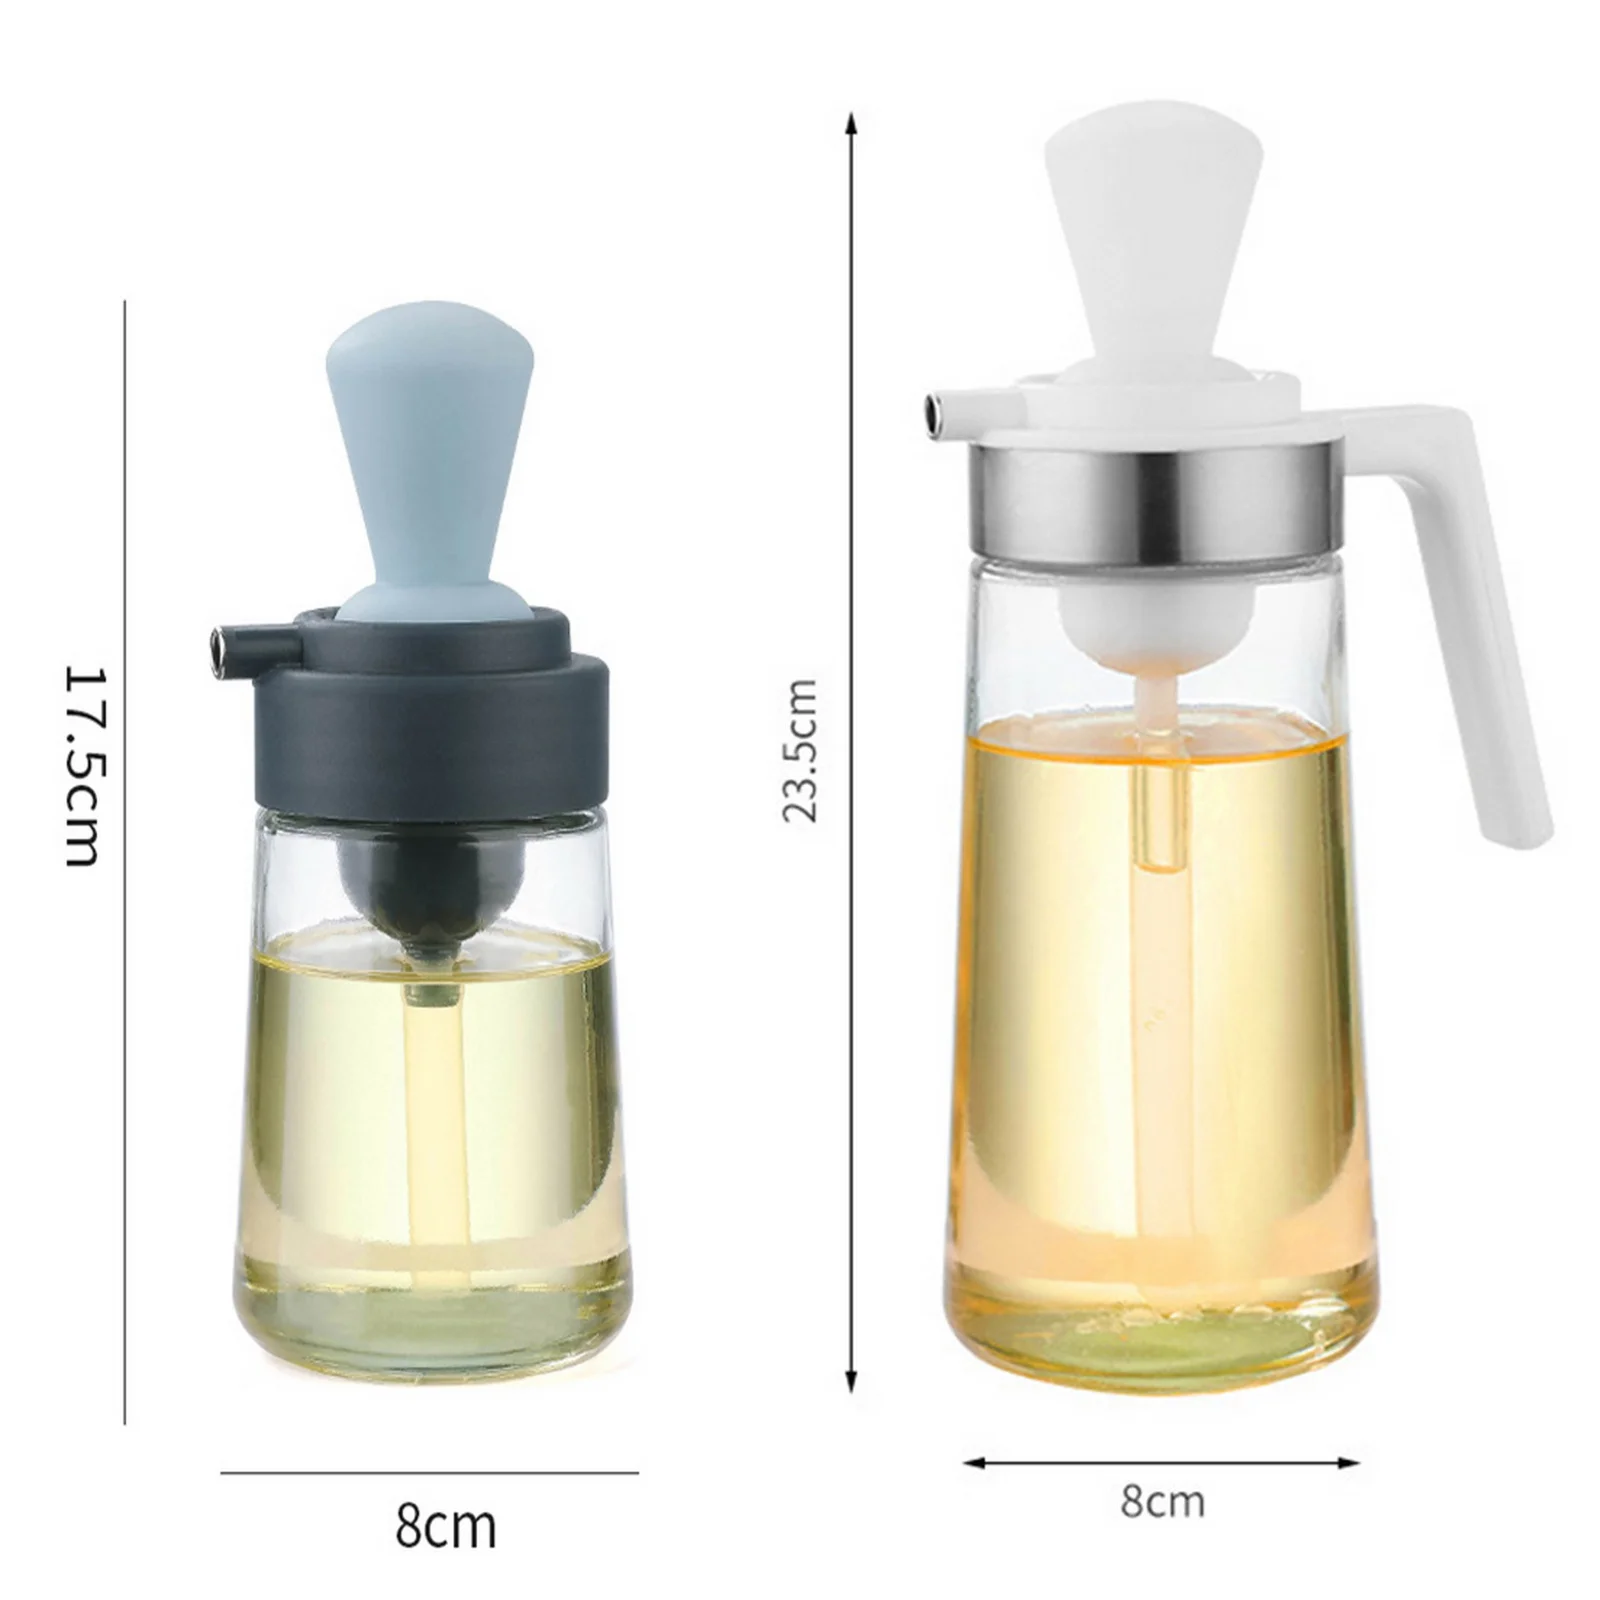 https://ae01.alicdn.com/kf/S2ce1989016b043febe793e11c88aaa31H/2-In-1-Olive-Oil-Dispenser-Multifunctional-Oil-Spray-Bottle-With-Silicone-Brush-Salad-Grilling-BBQ.png